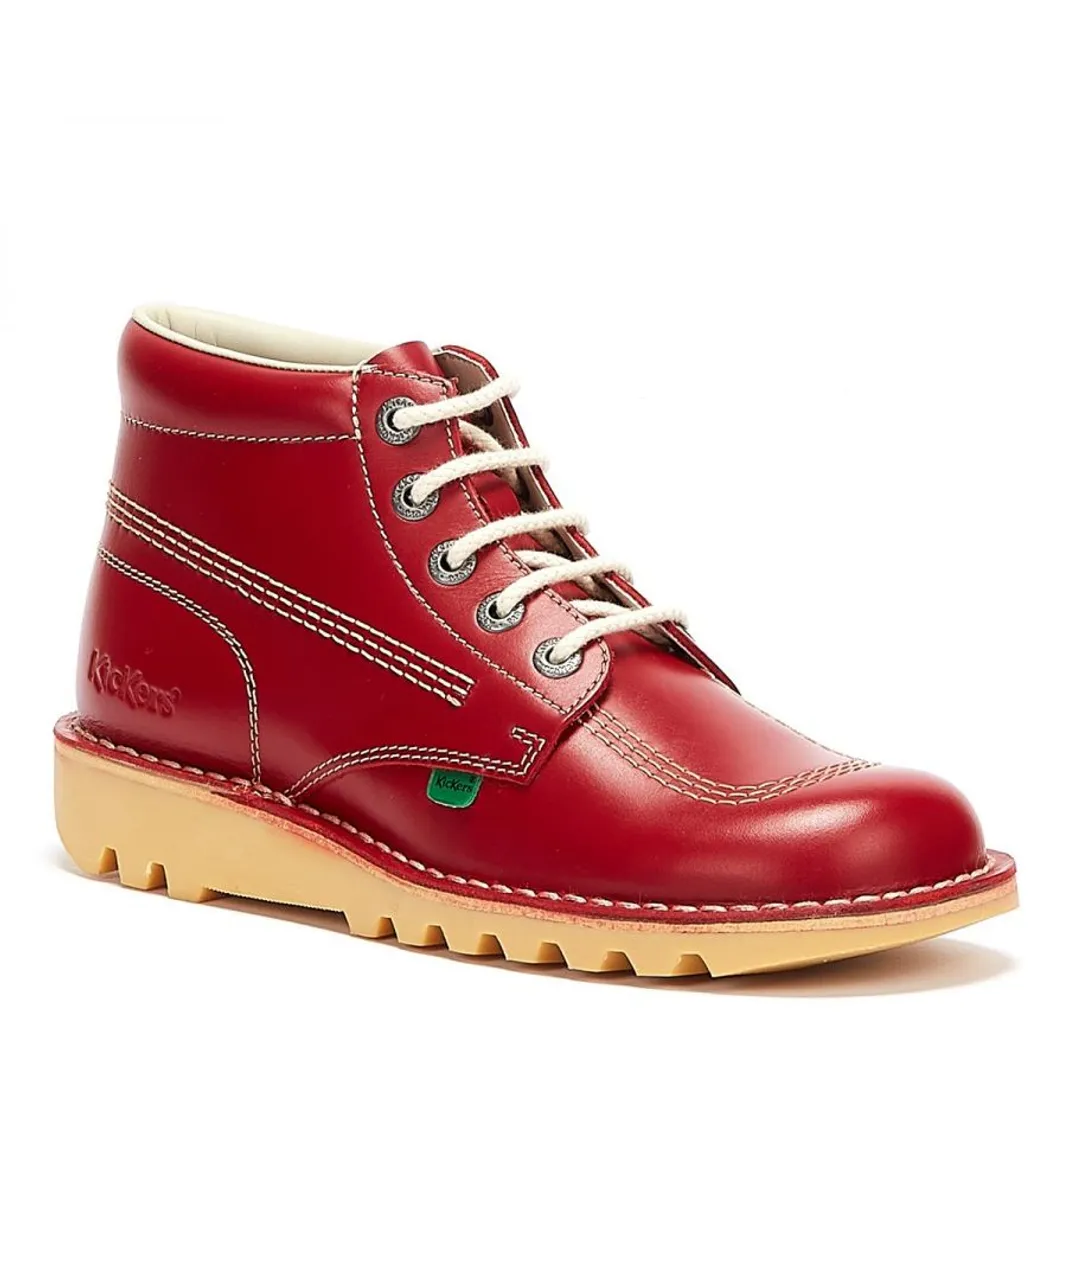 Kickers Kick Hi Mens Red Leather Boots Rubber